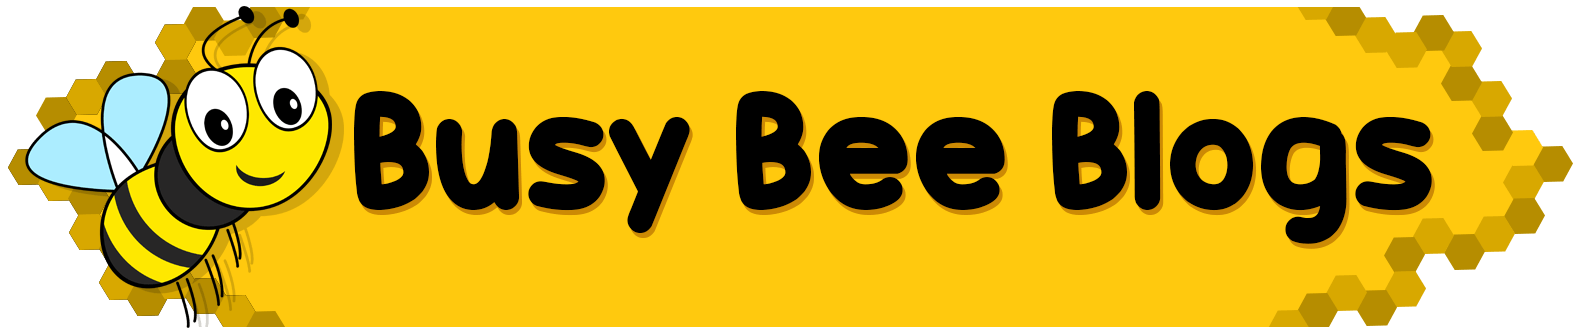 Busy Bee Blogs